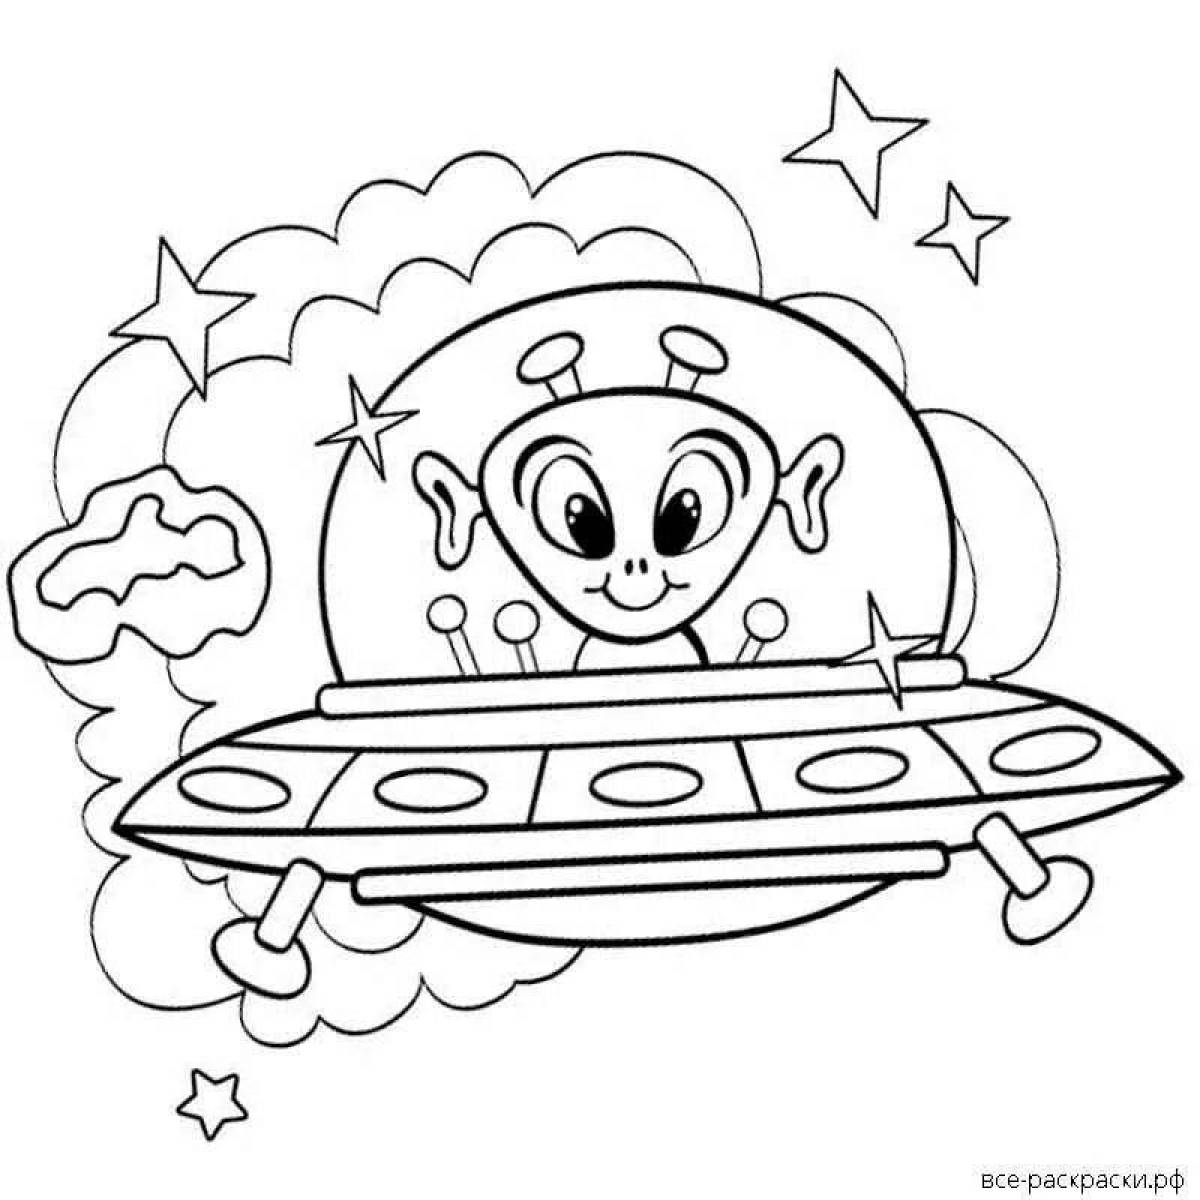 Colored aliens coloring pages for kids